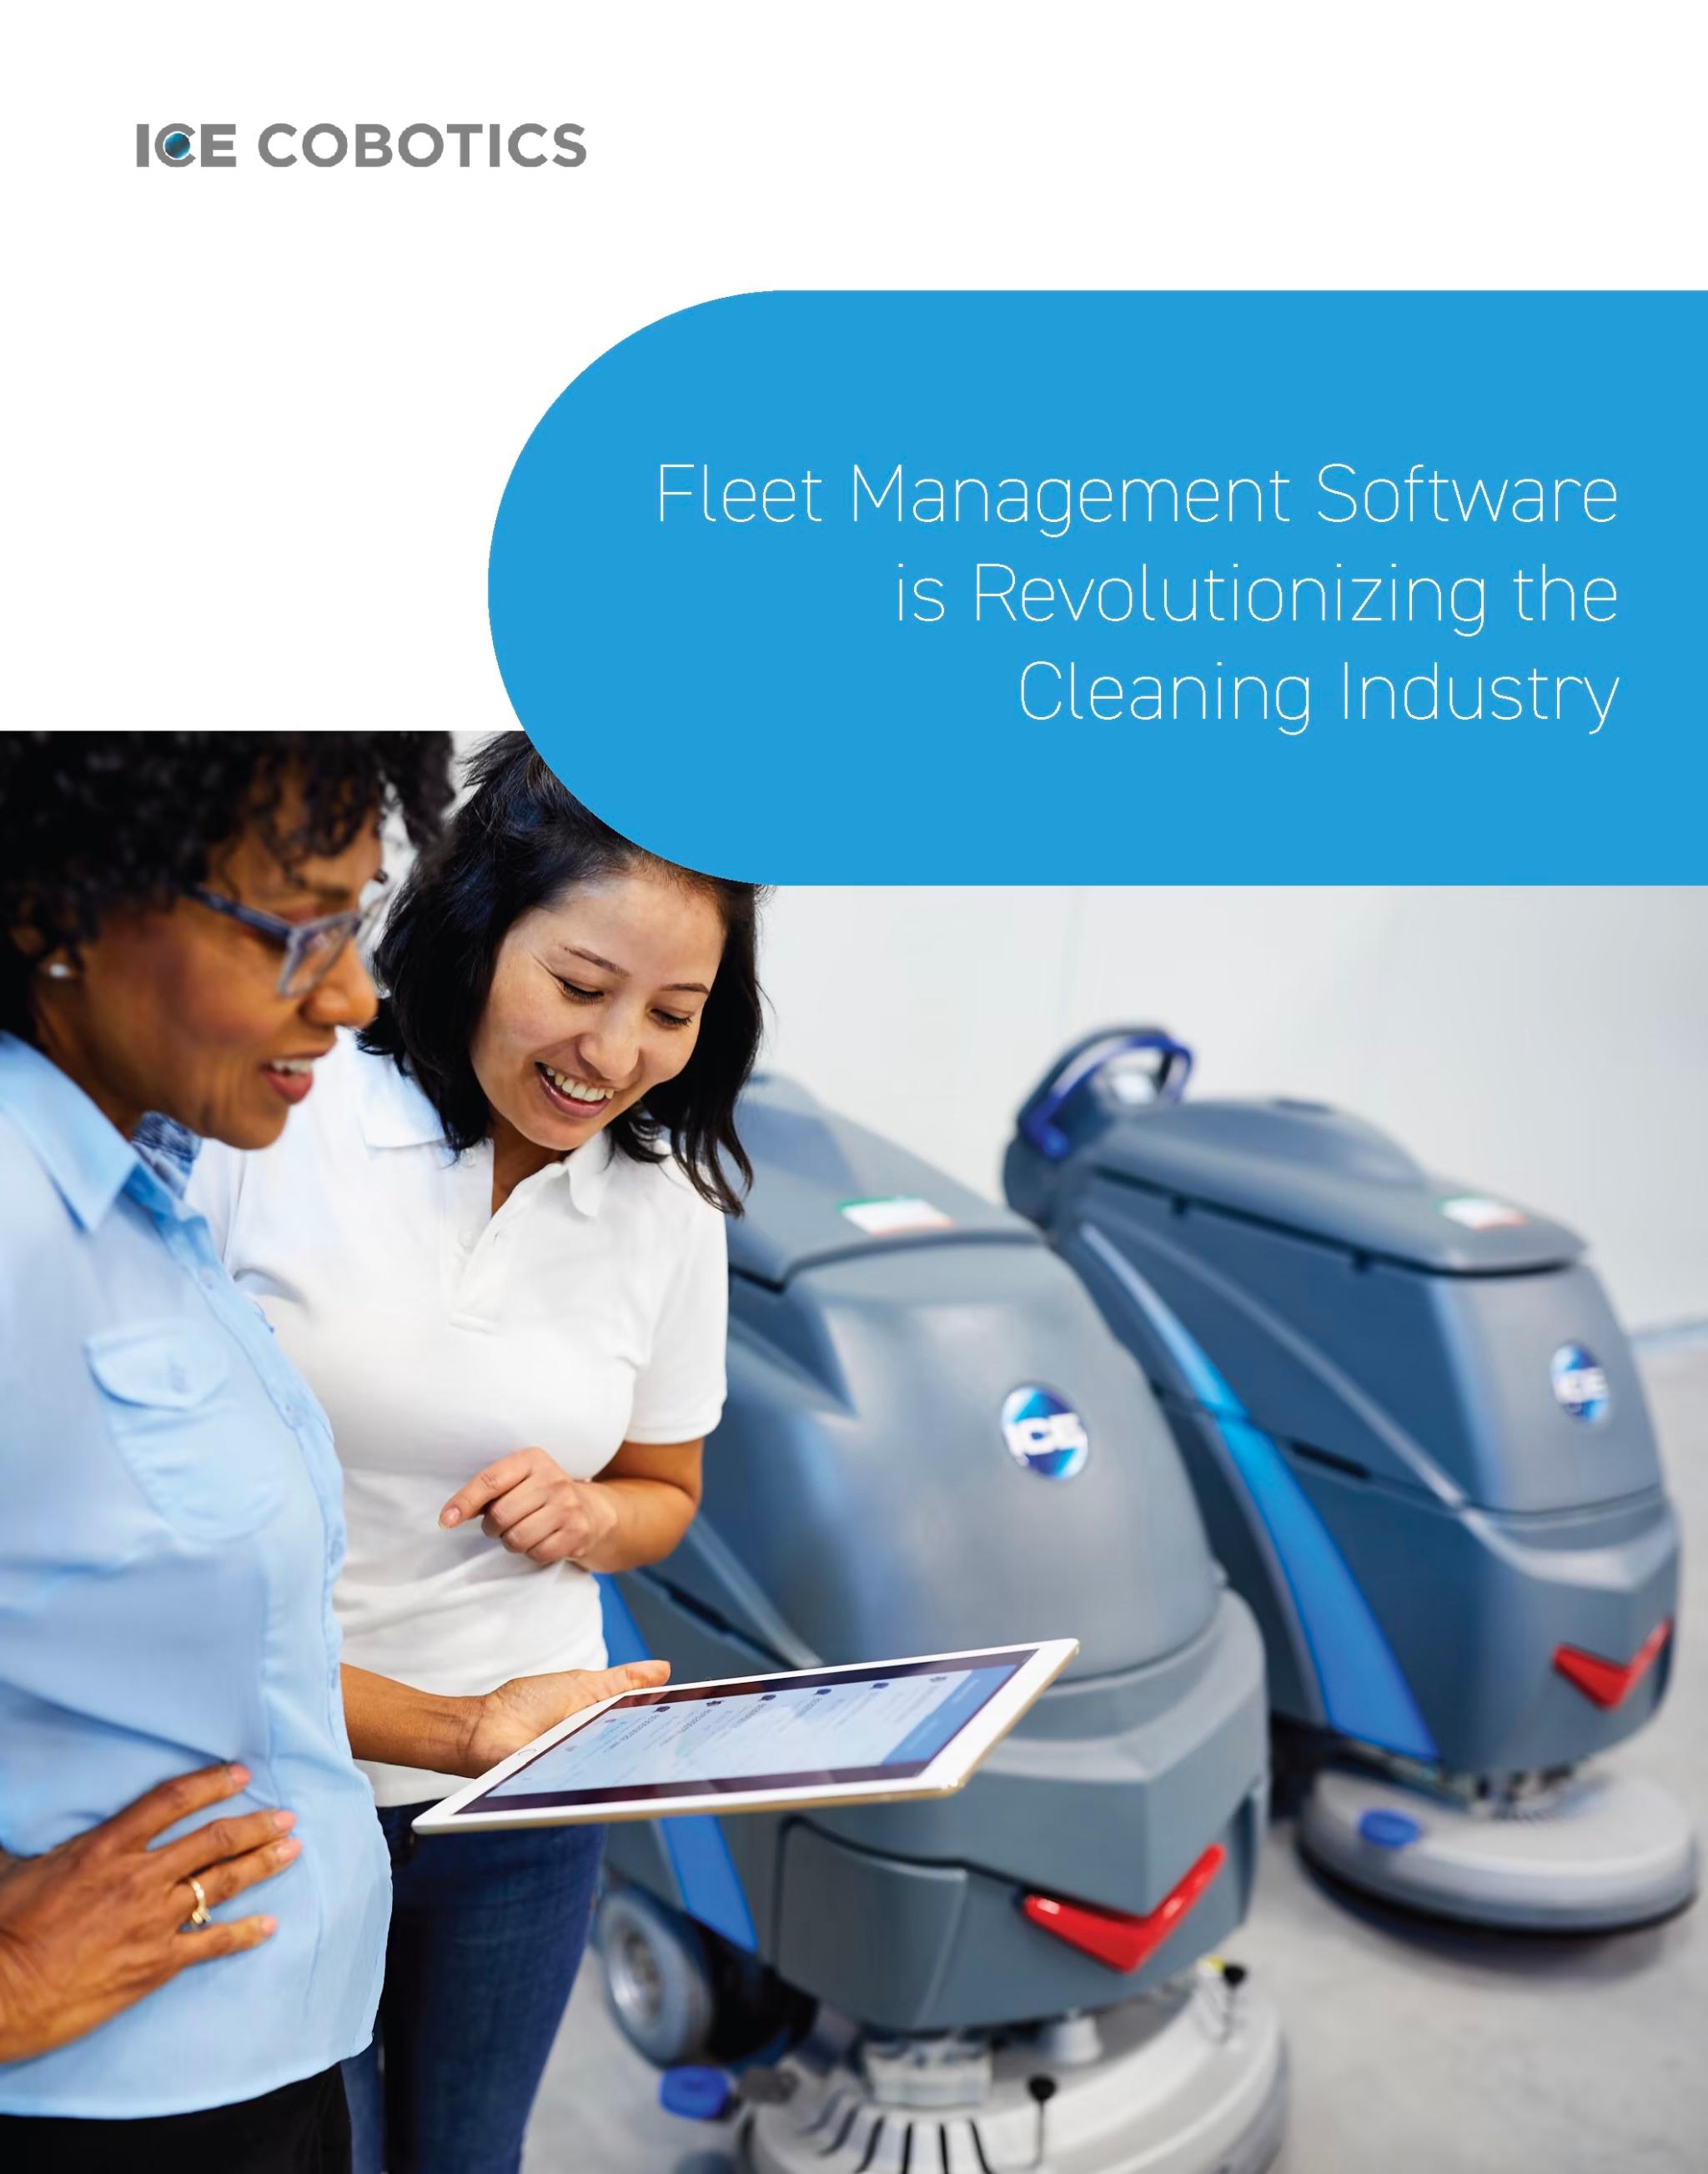 fleet management software is revolutionizing the cleaning industry